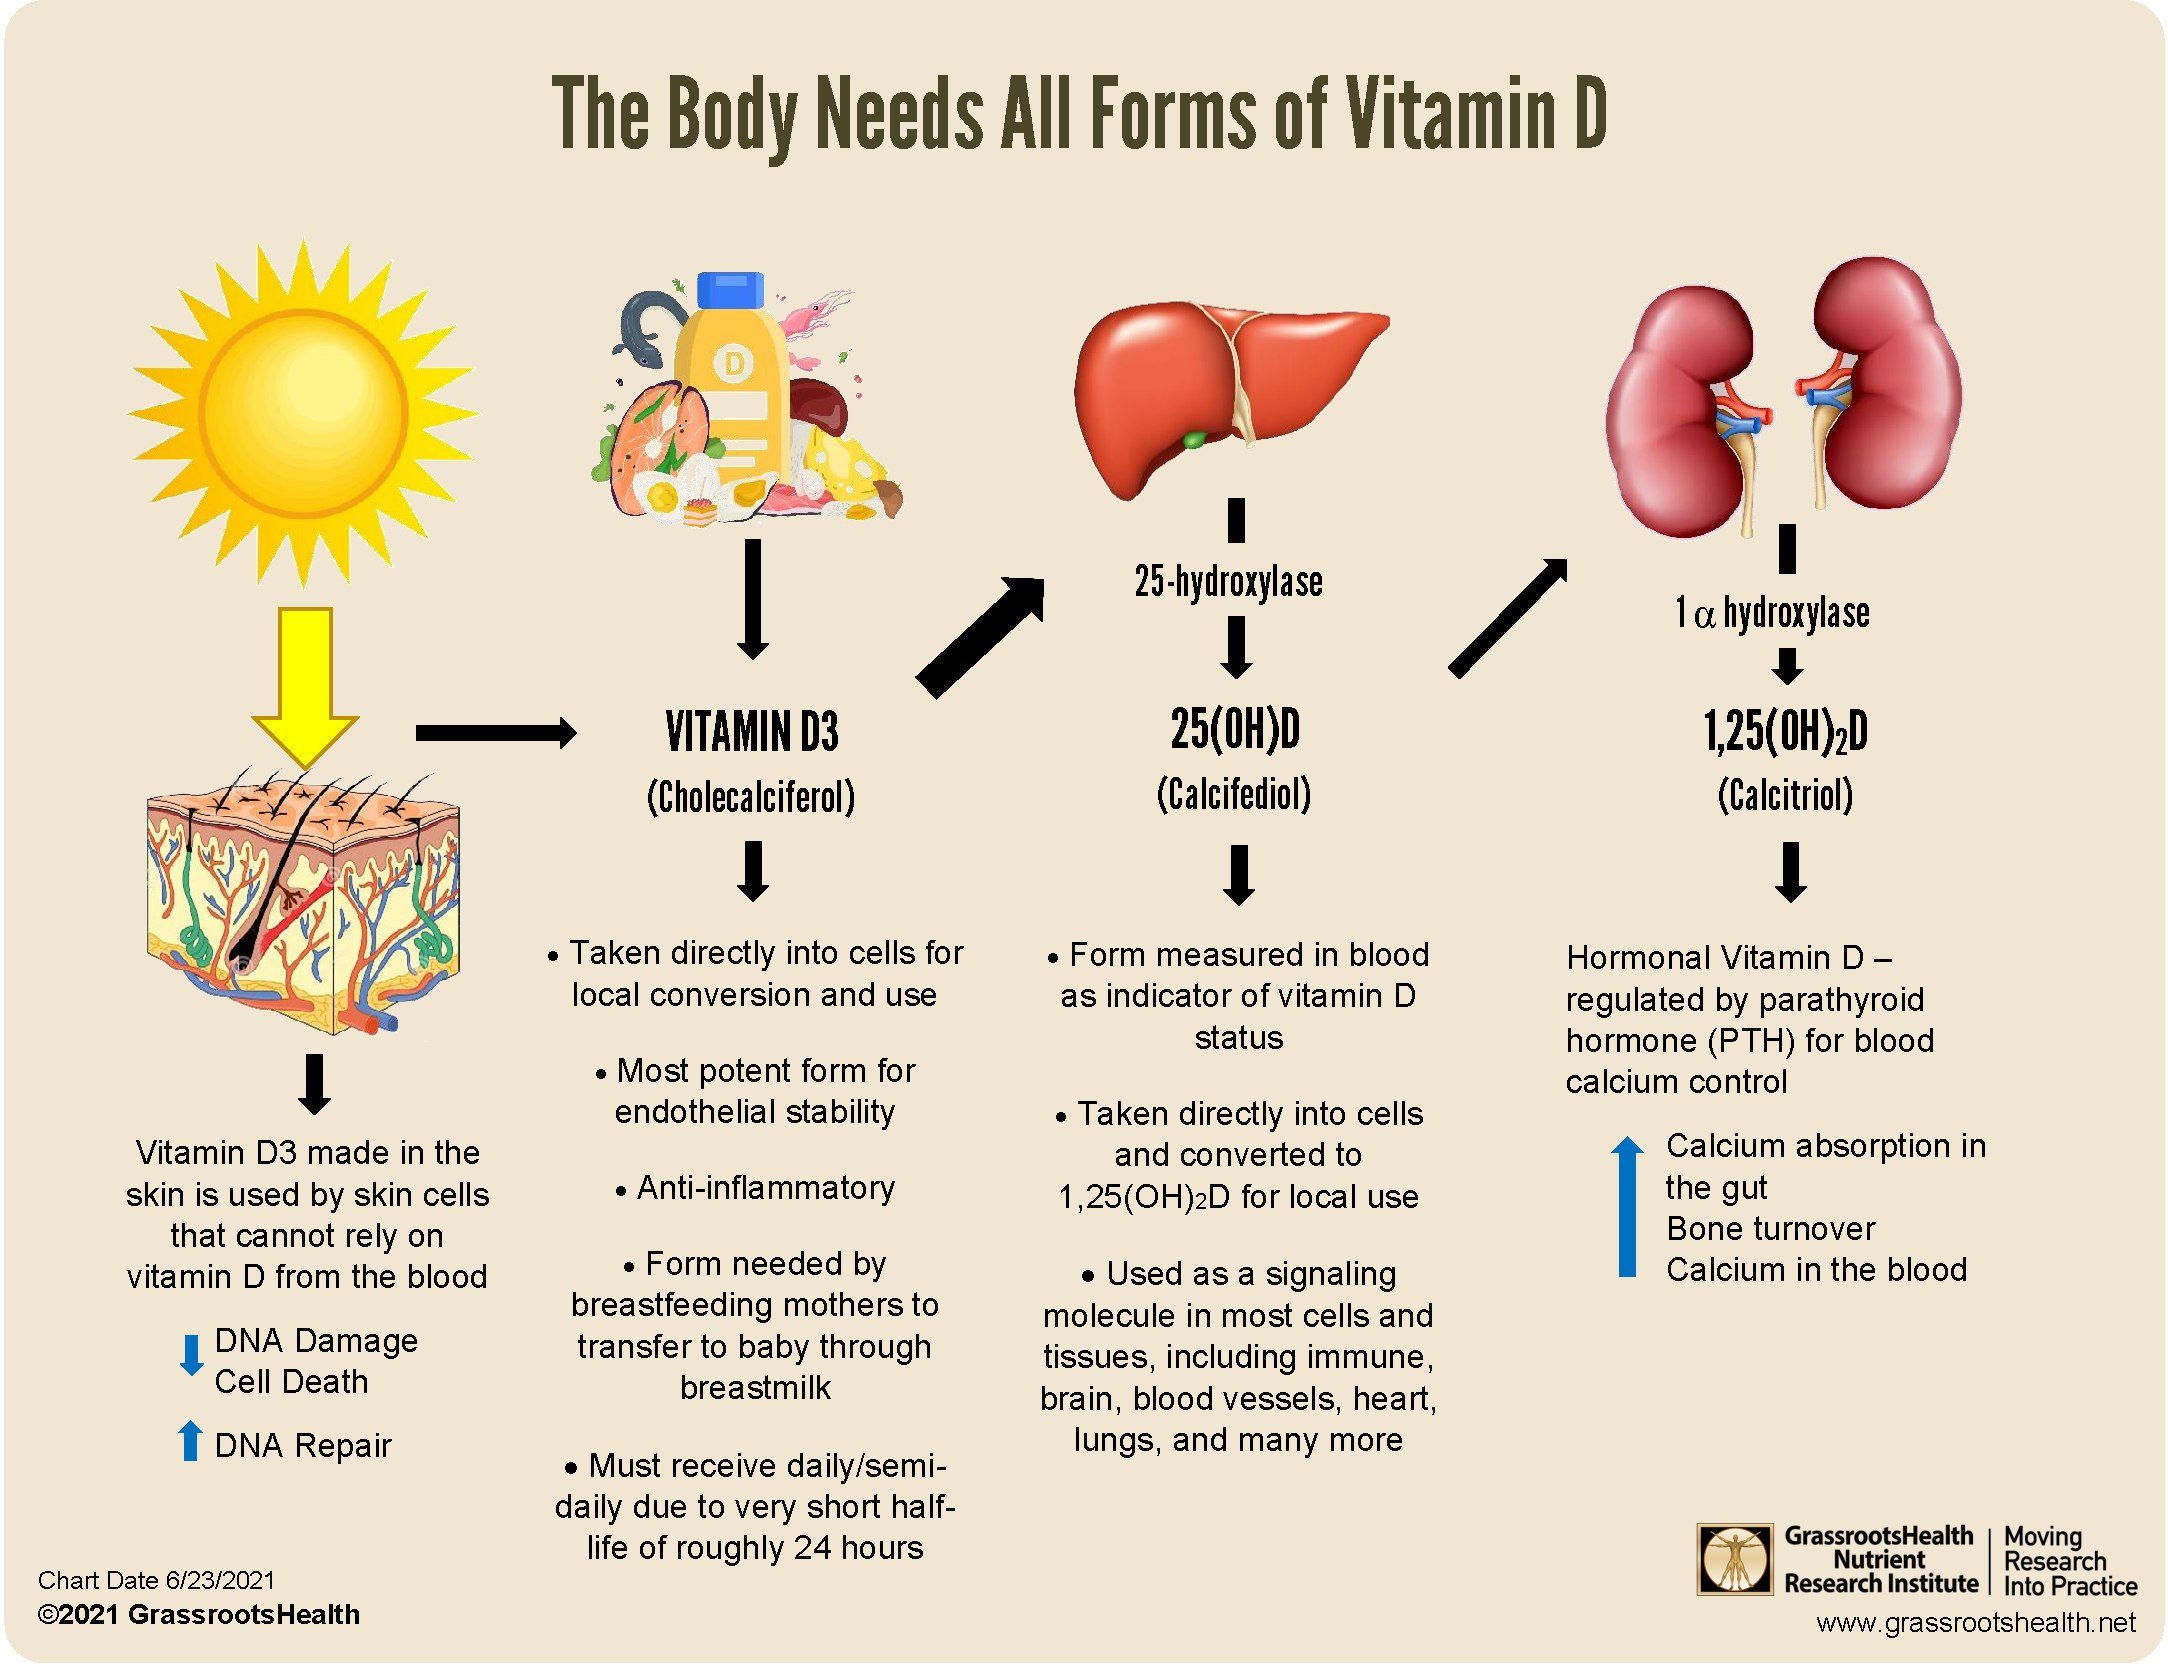 the-body-needs-all-forms-of-vitamin-d-grassrootshealth